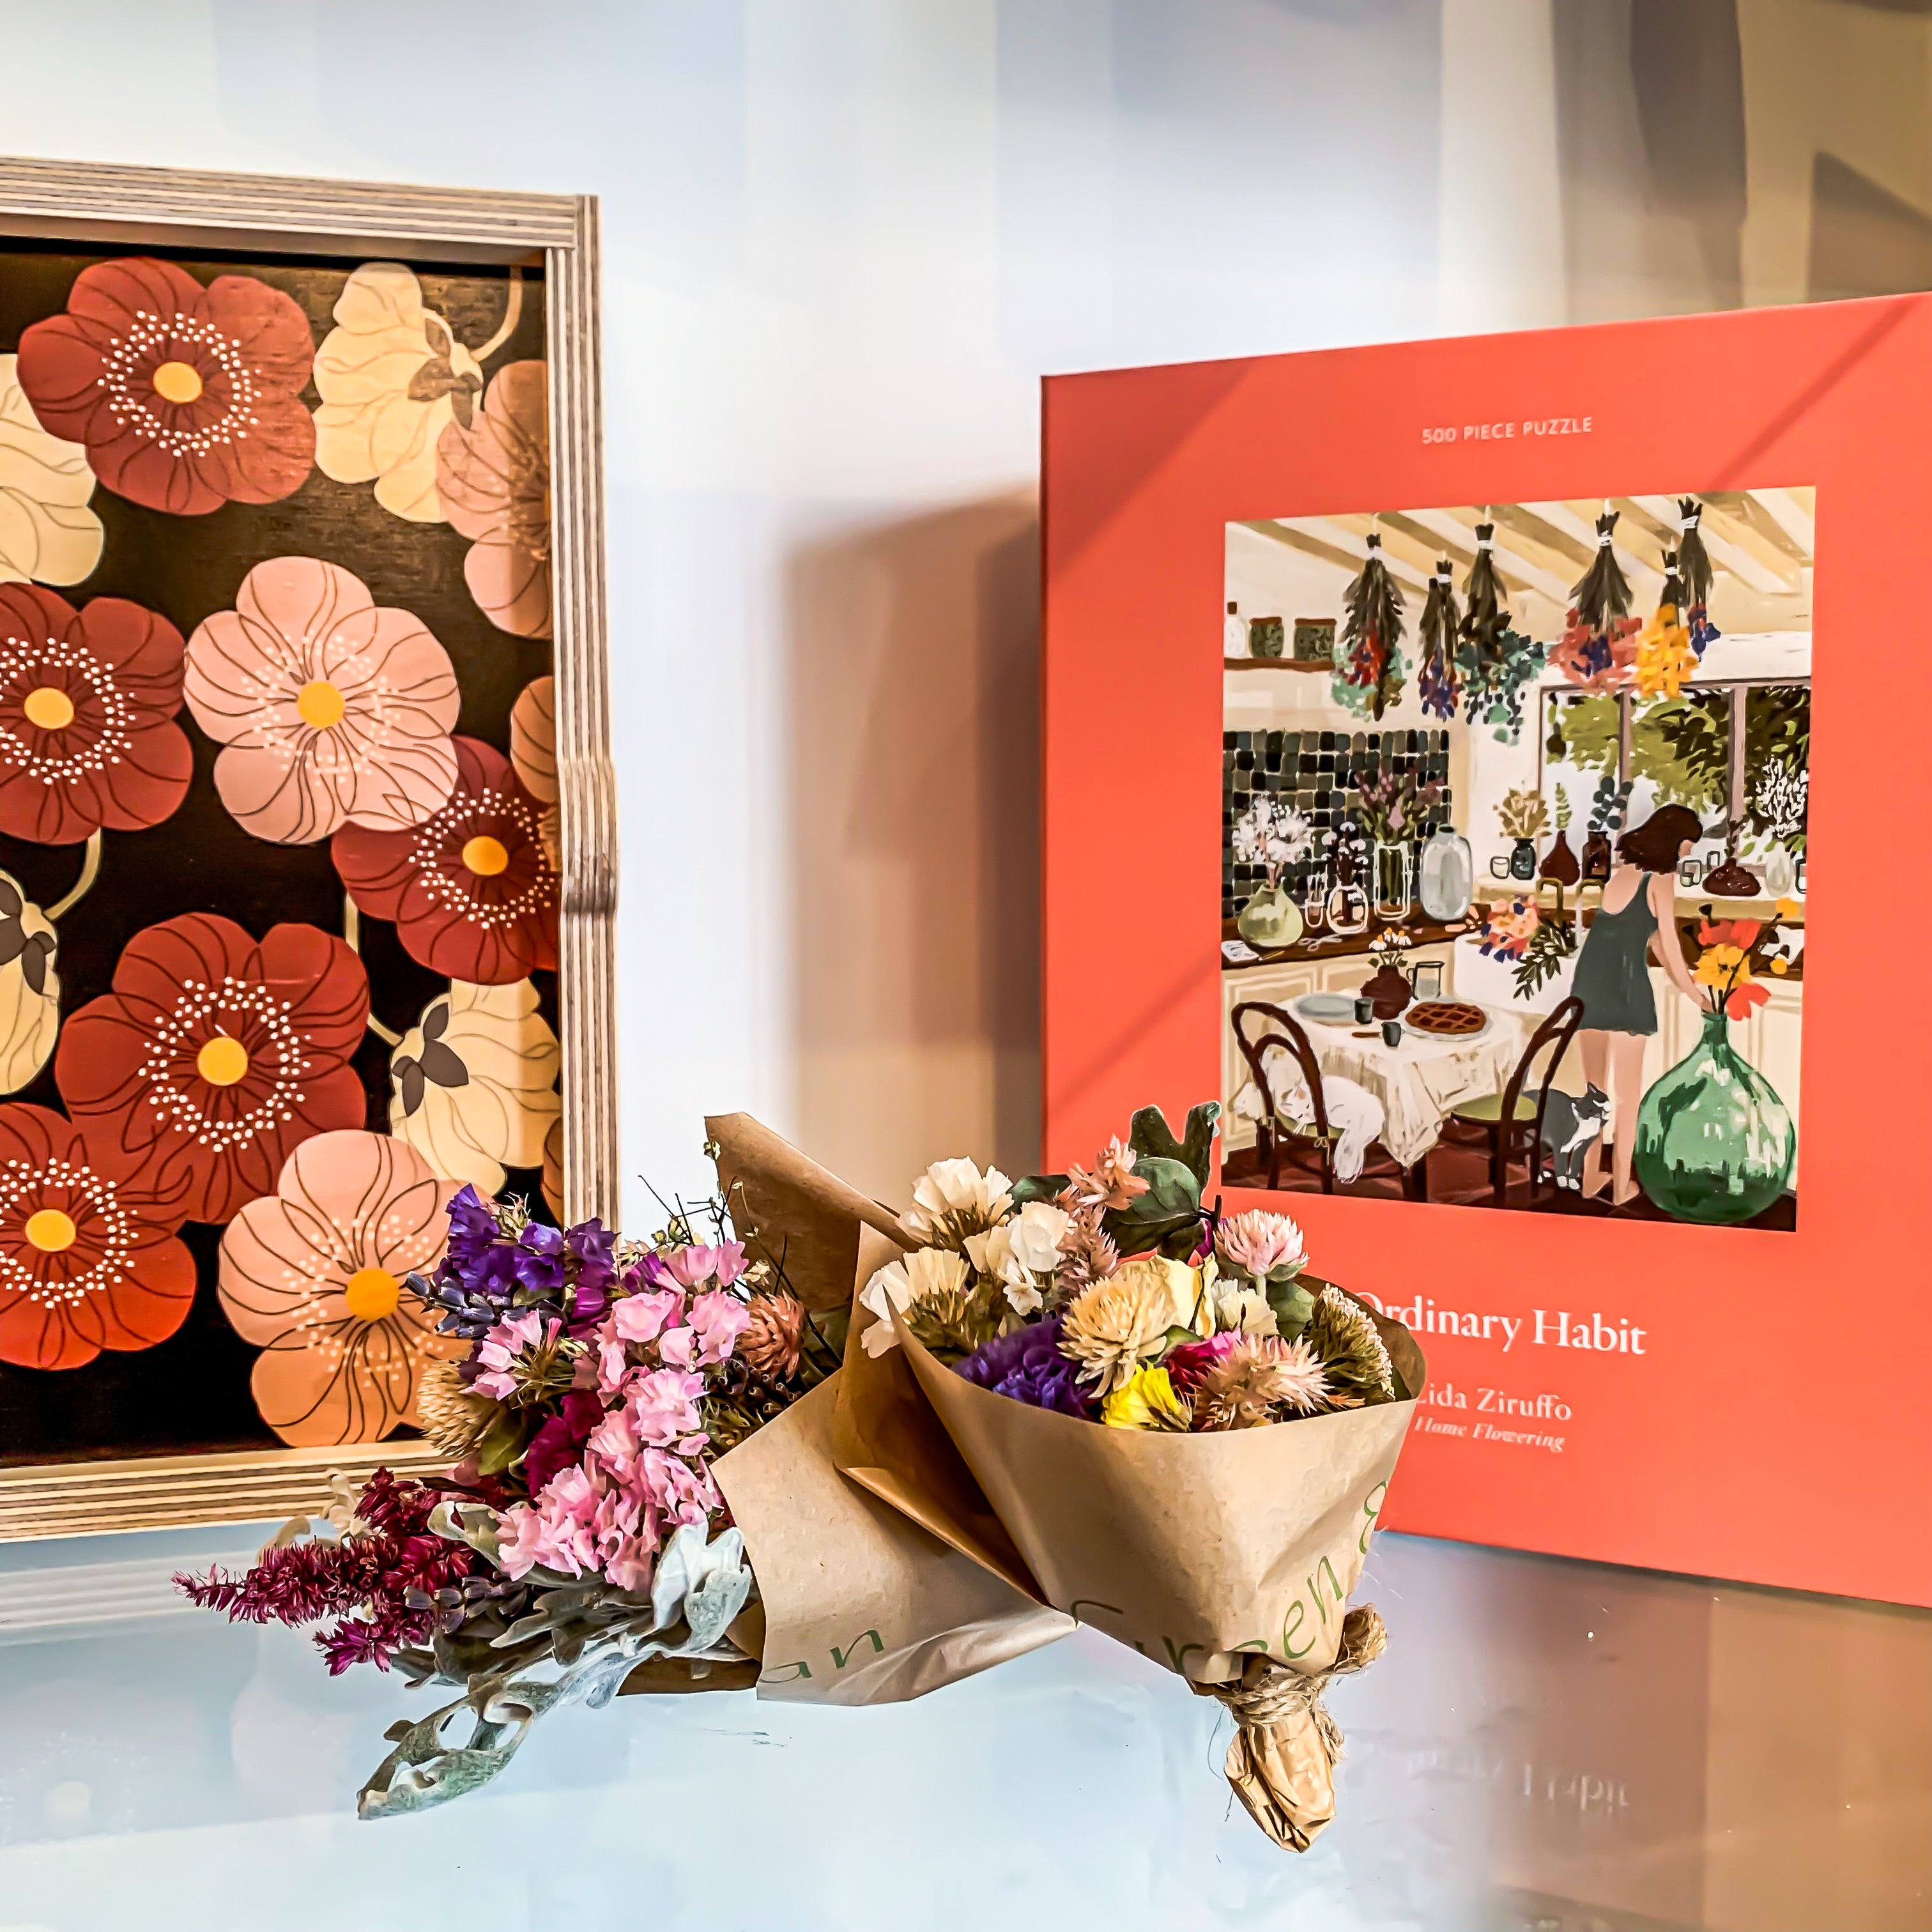 Green & Bean Gift shop cover photo featuring a maroon poppy tray, mini dried bouquets, and Ordinary Habit's Home Flowering 500 piece puzzle